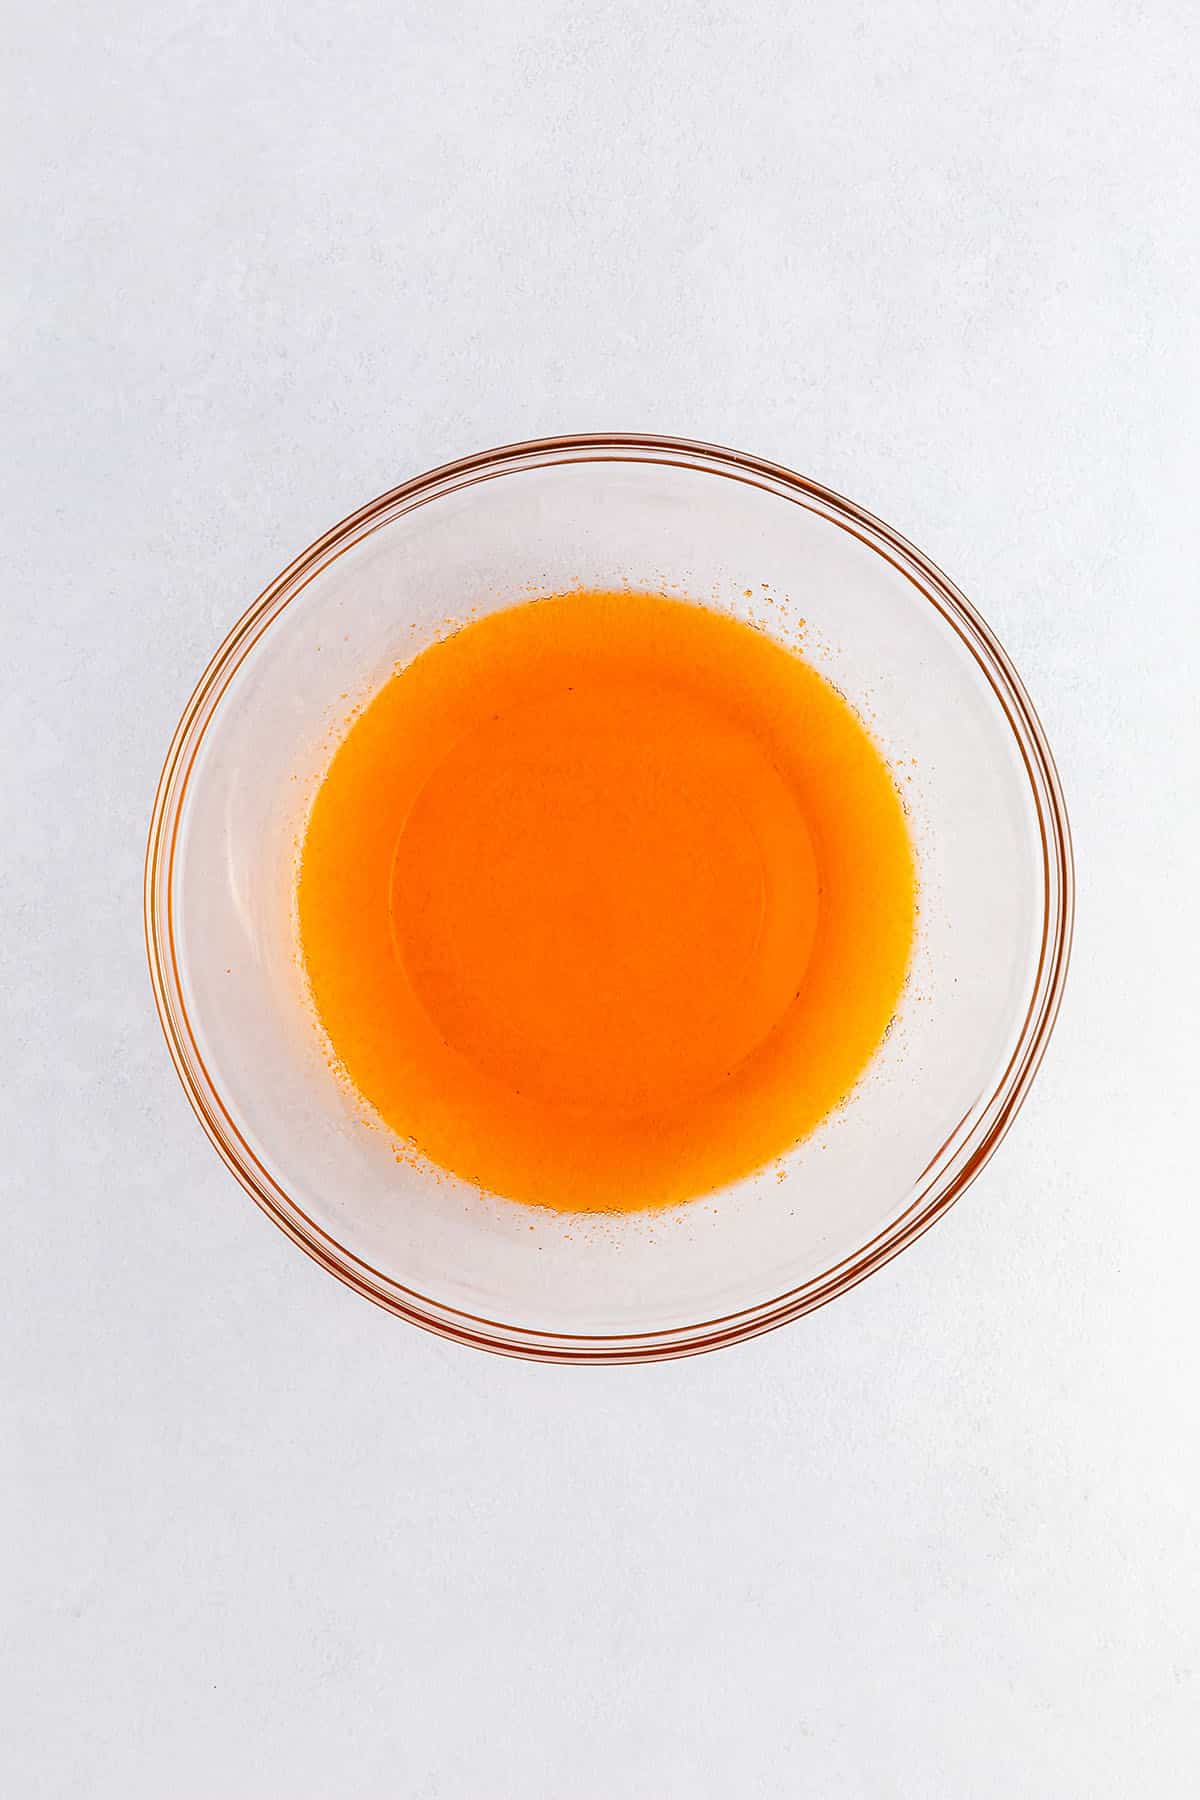 Jell-O mix with water in orange liquid color